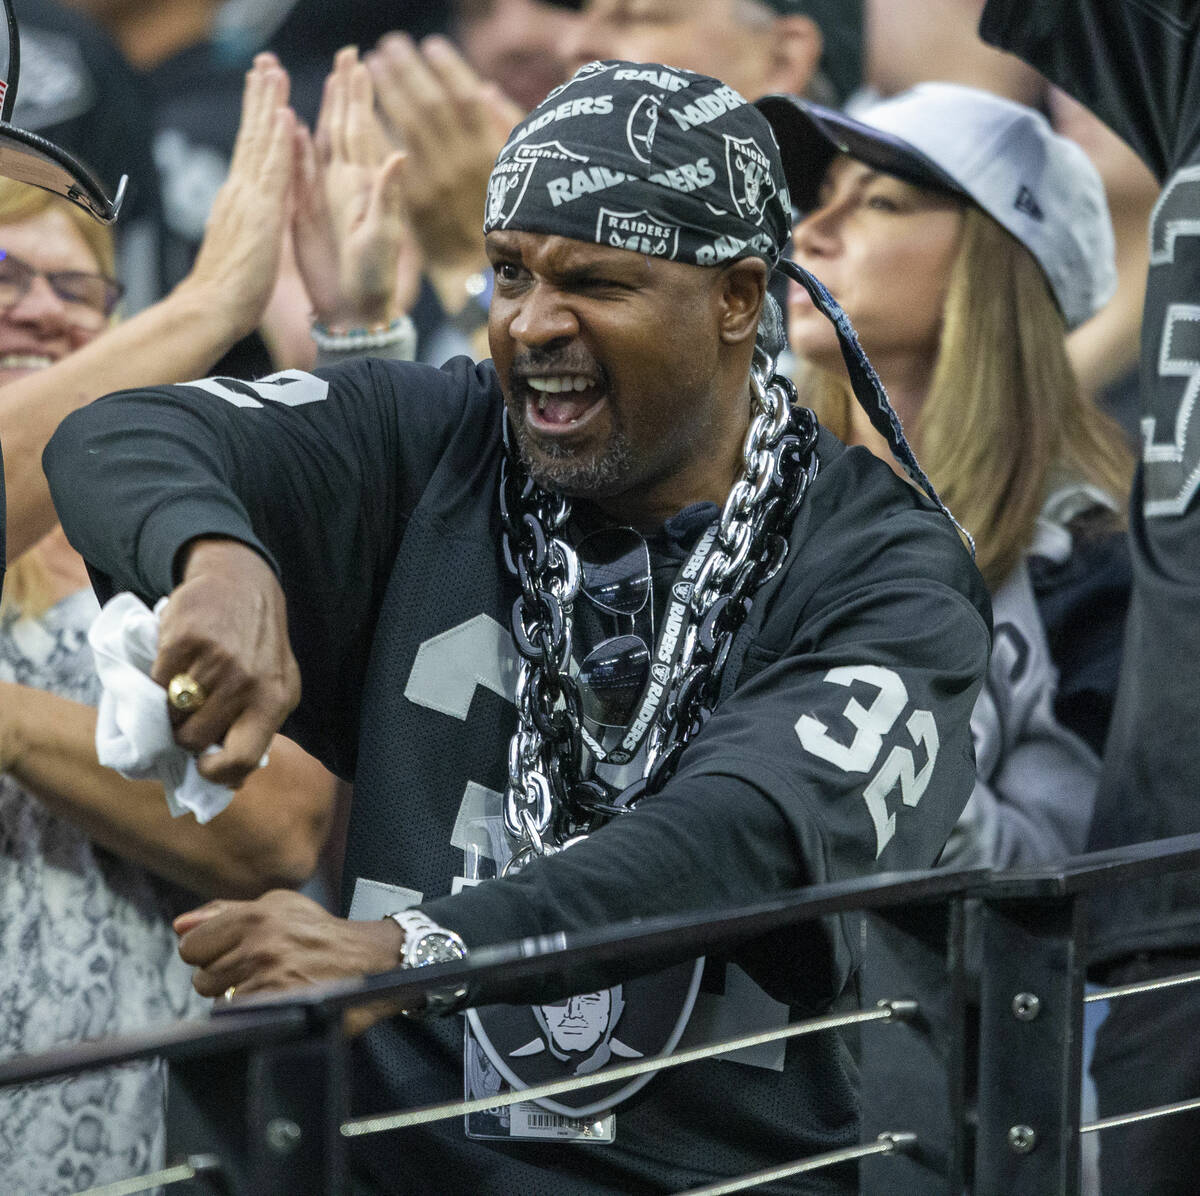 A Raiders fan celebrates during the third quarter of an NFL football game against the Philadelp ...